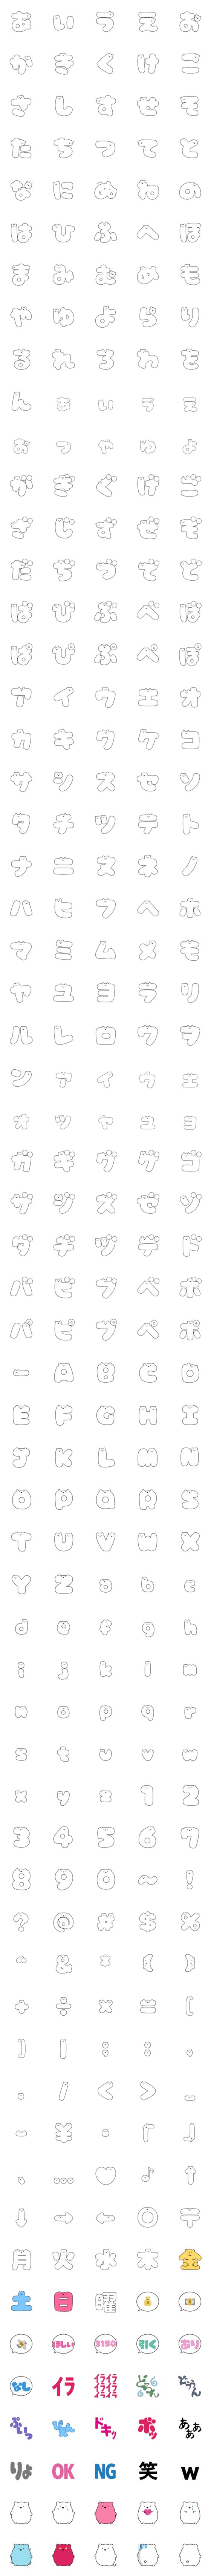 [LINE絵文字]しろくま デコ絵文字の画像一覧